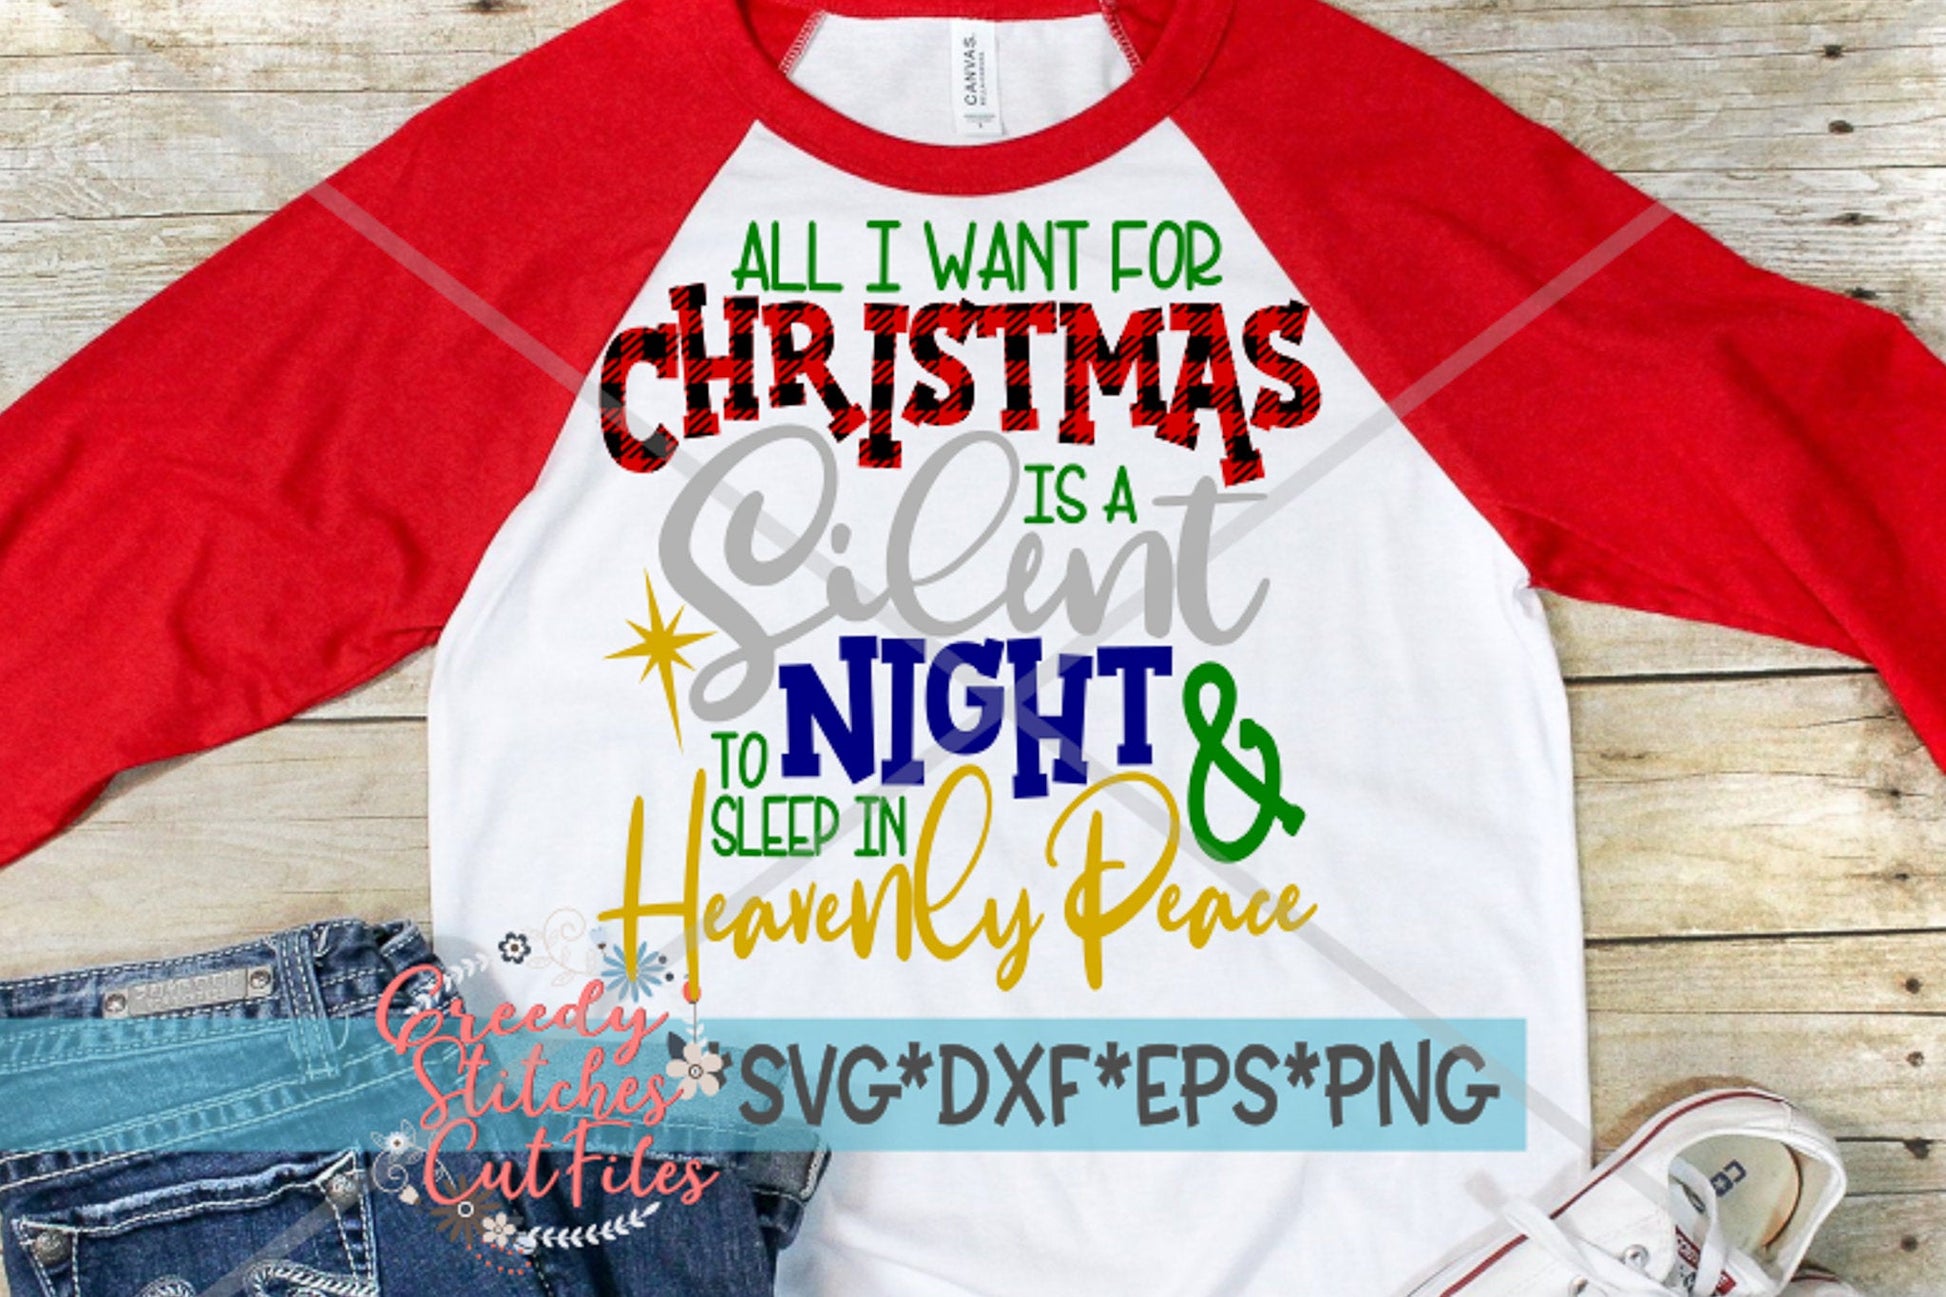 All I Want For Christmas Is A Silent Night And To Sleep In Heavenly Peace svg dxf eps png. Christmas SvG  | Instant Download Cut Files